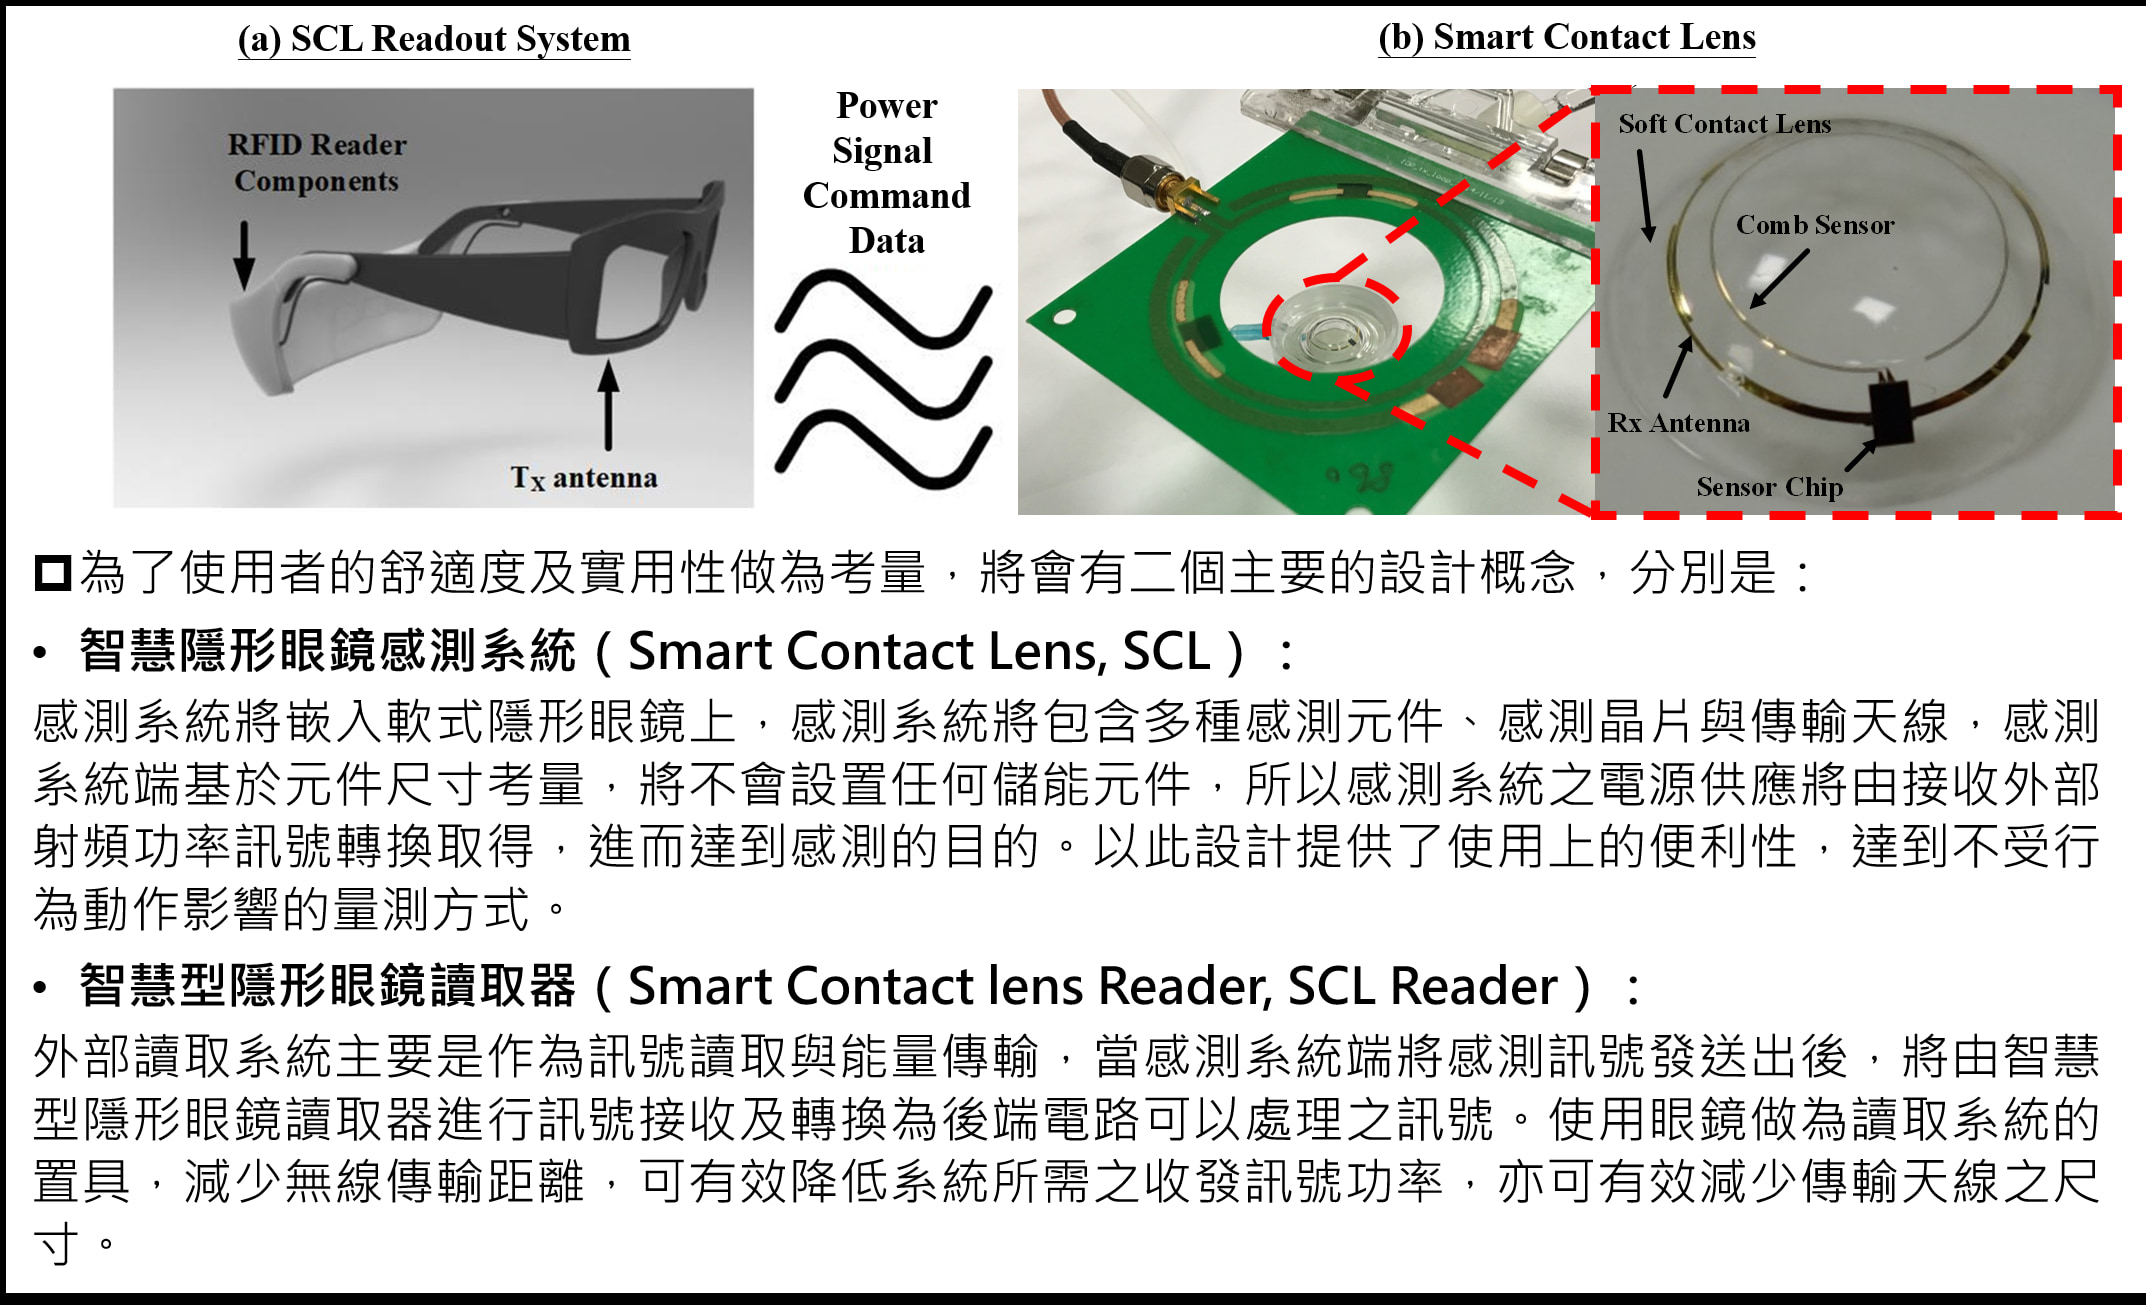 The Development of Smart Contact Lens System: Taking Dry Eye Syndrome Diagnosis as an Example